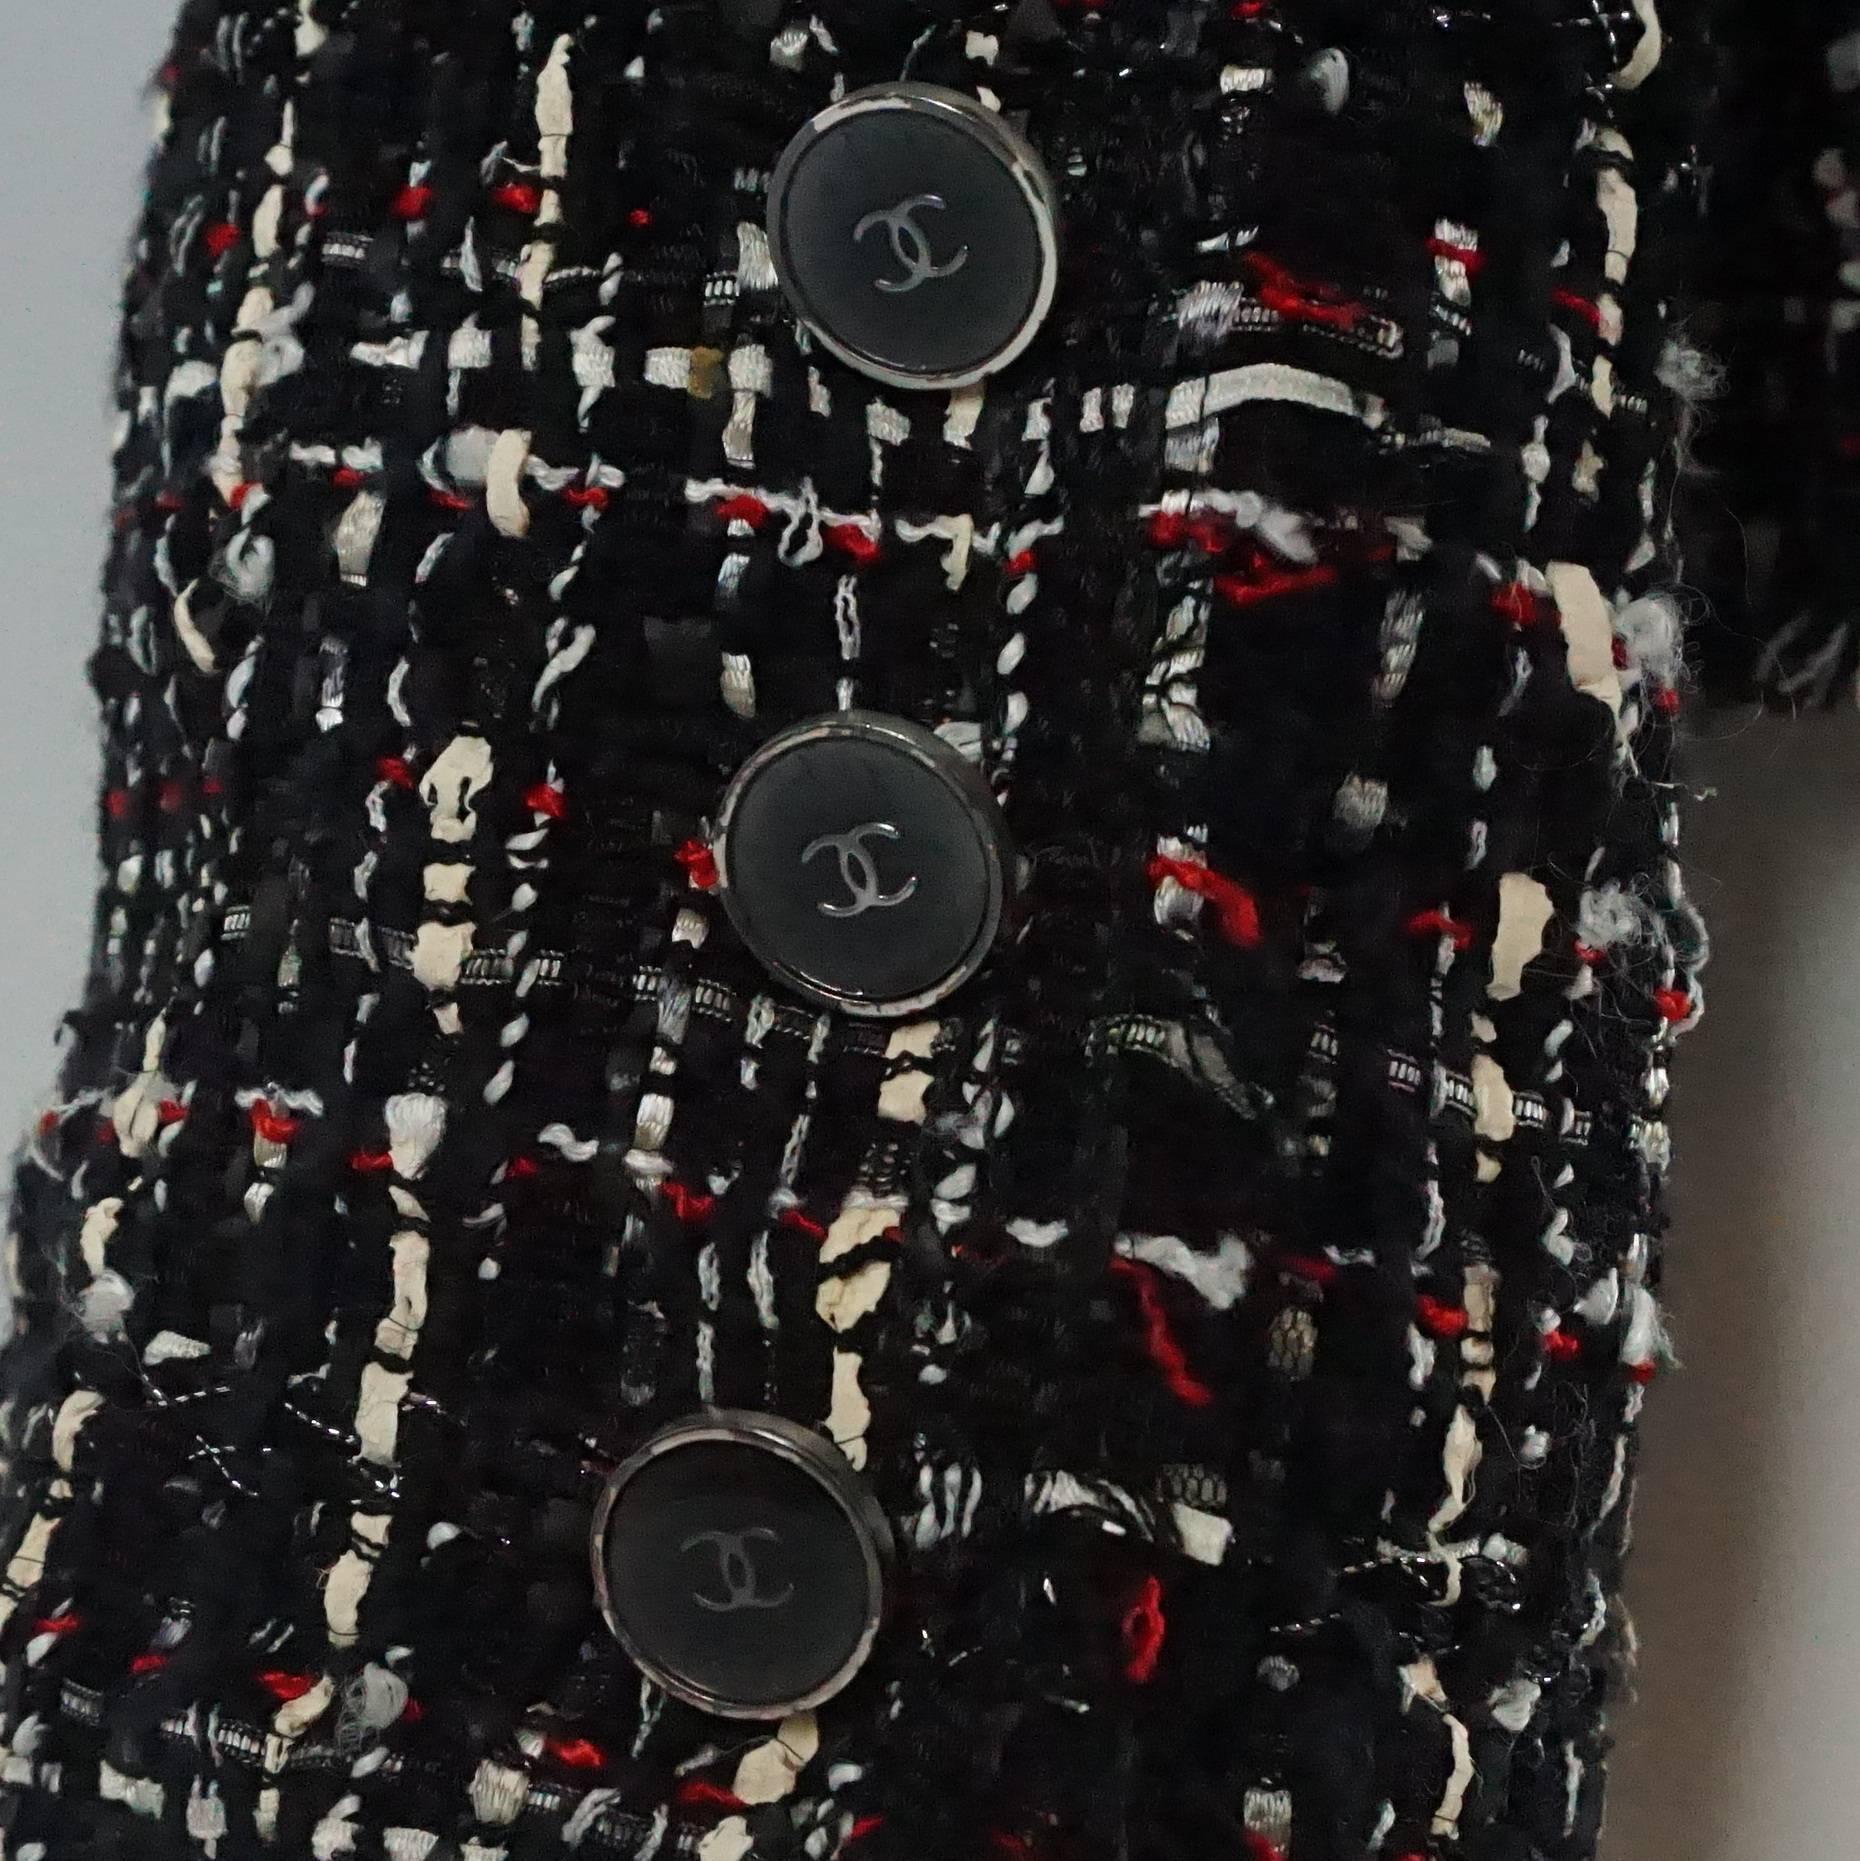 Chanel Black, White, and Red Silk and Wool Blend Boucle Jacket - 44 - circa 05P 1